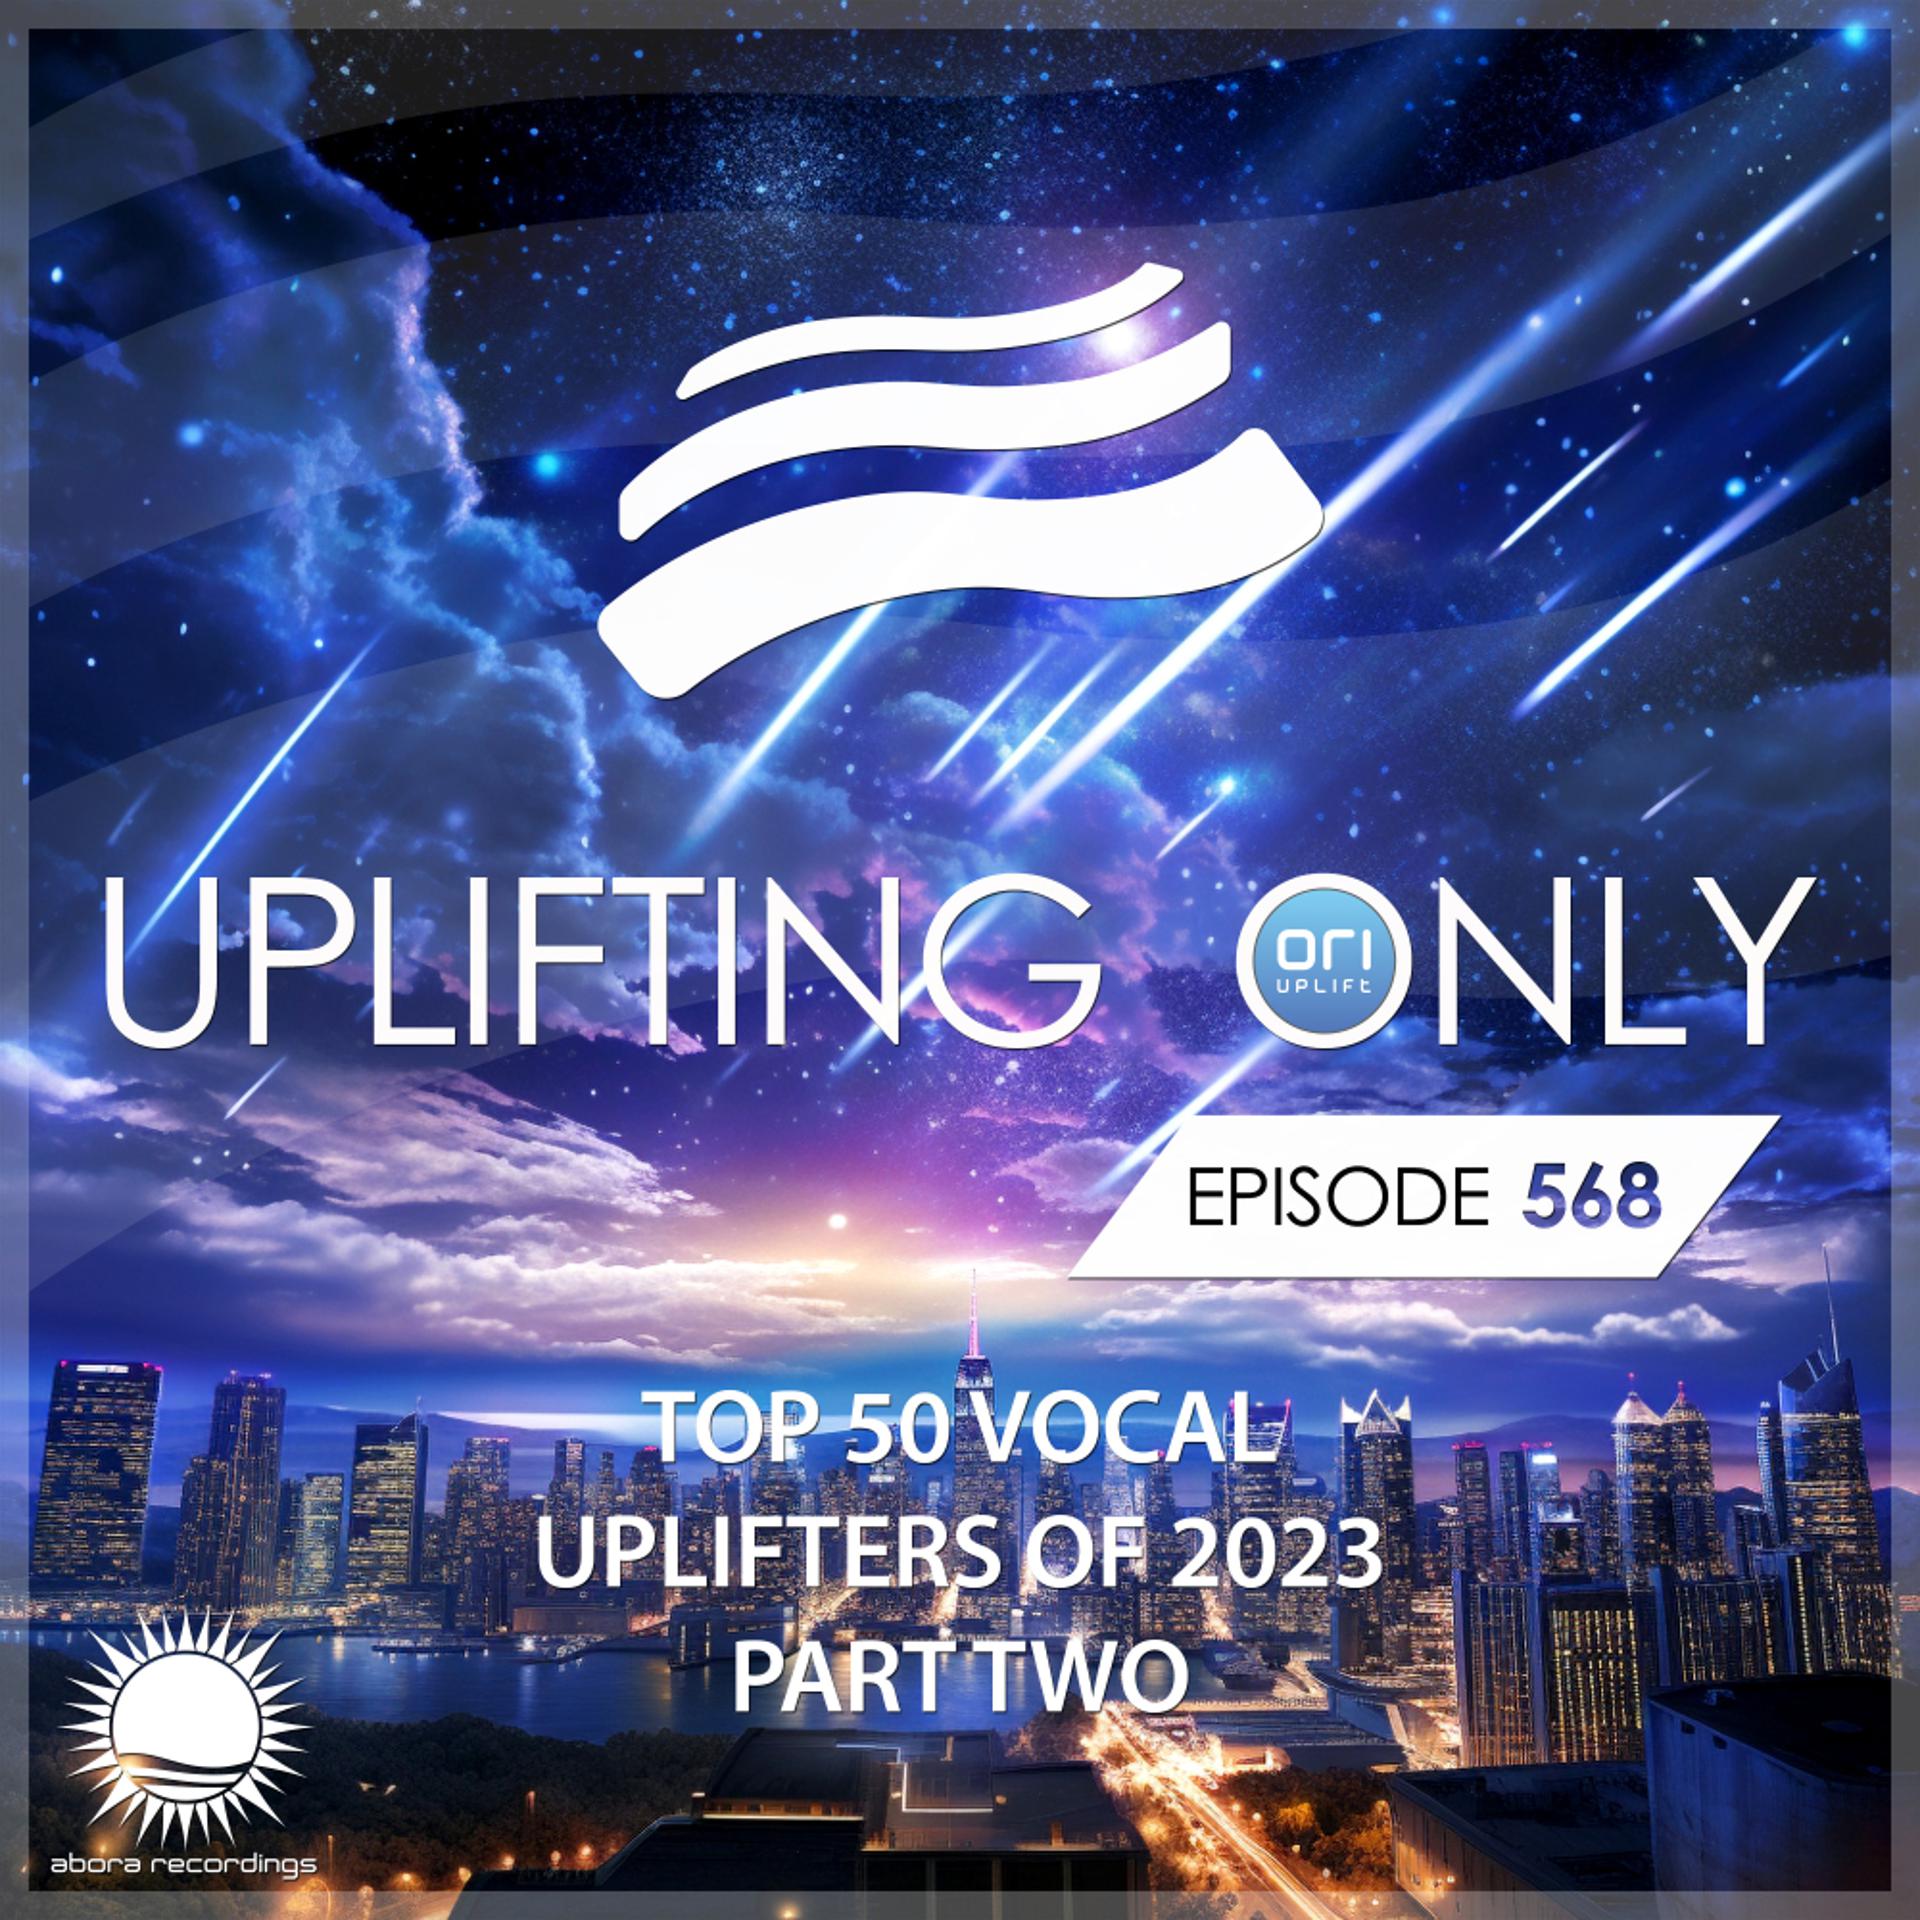 Постер альбома Uplifting Only 568: No-Talking DJ Mix: Ori's Top 50 Vocal Uplifters of 2023 - Part 2